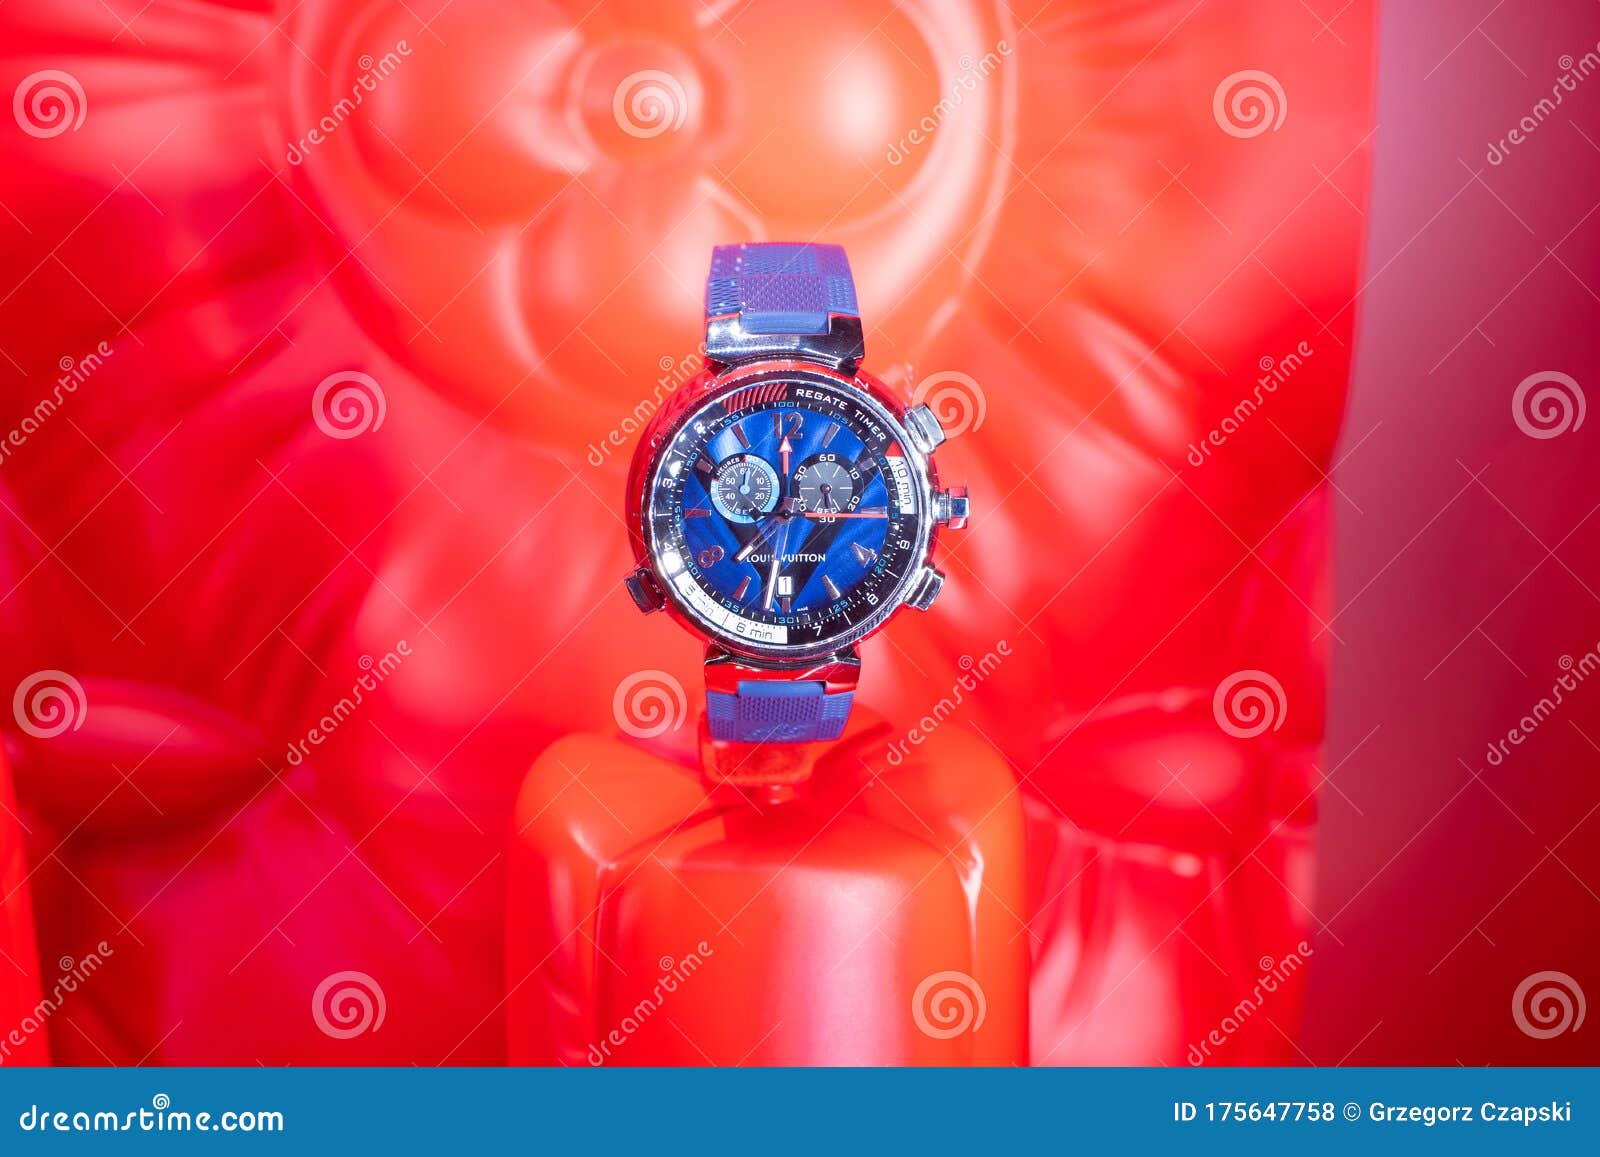 Louis Vuitton Watch On Display For Sale, LV Louis Vuitton Is Fashion House And Luxury Retail ...